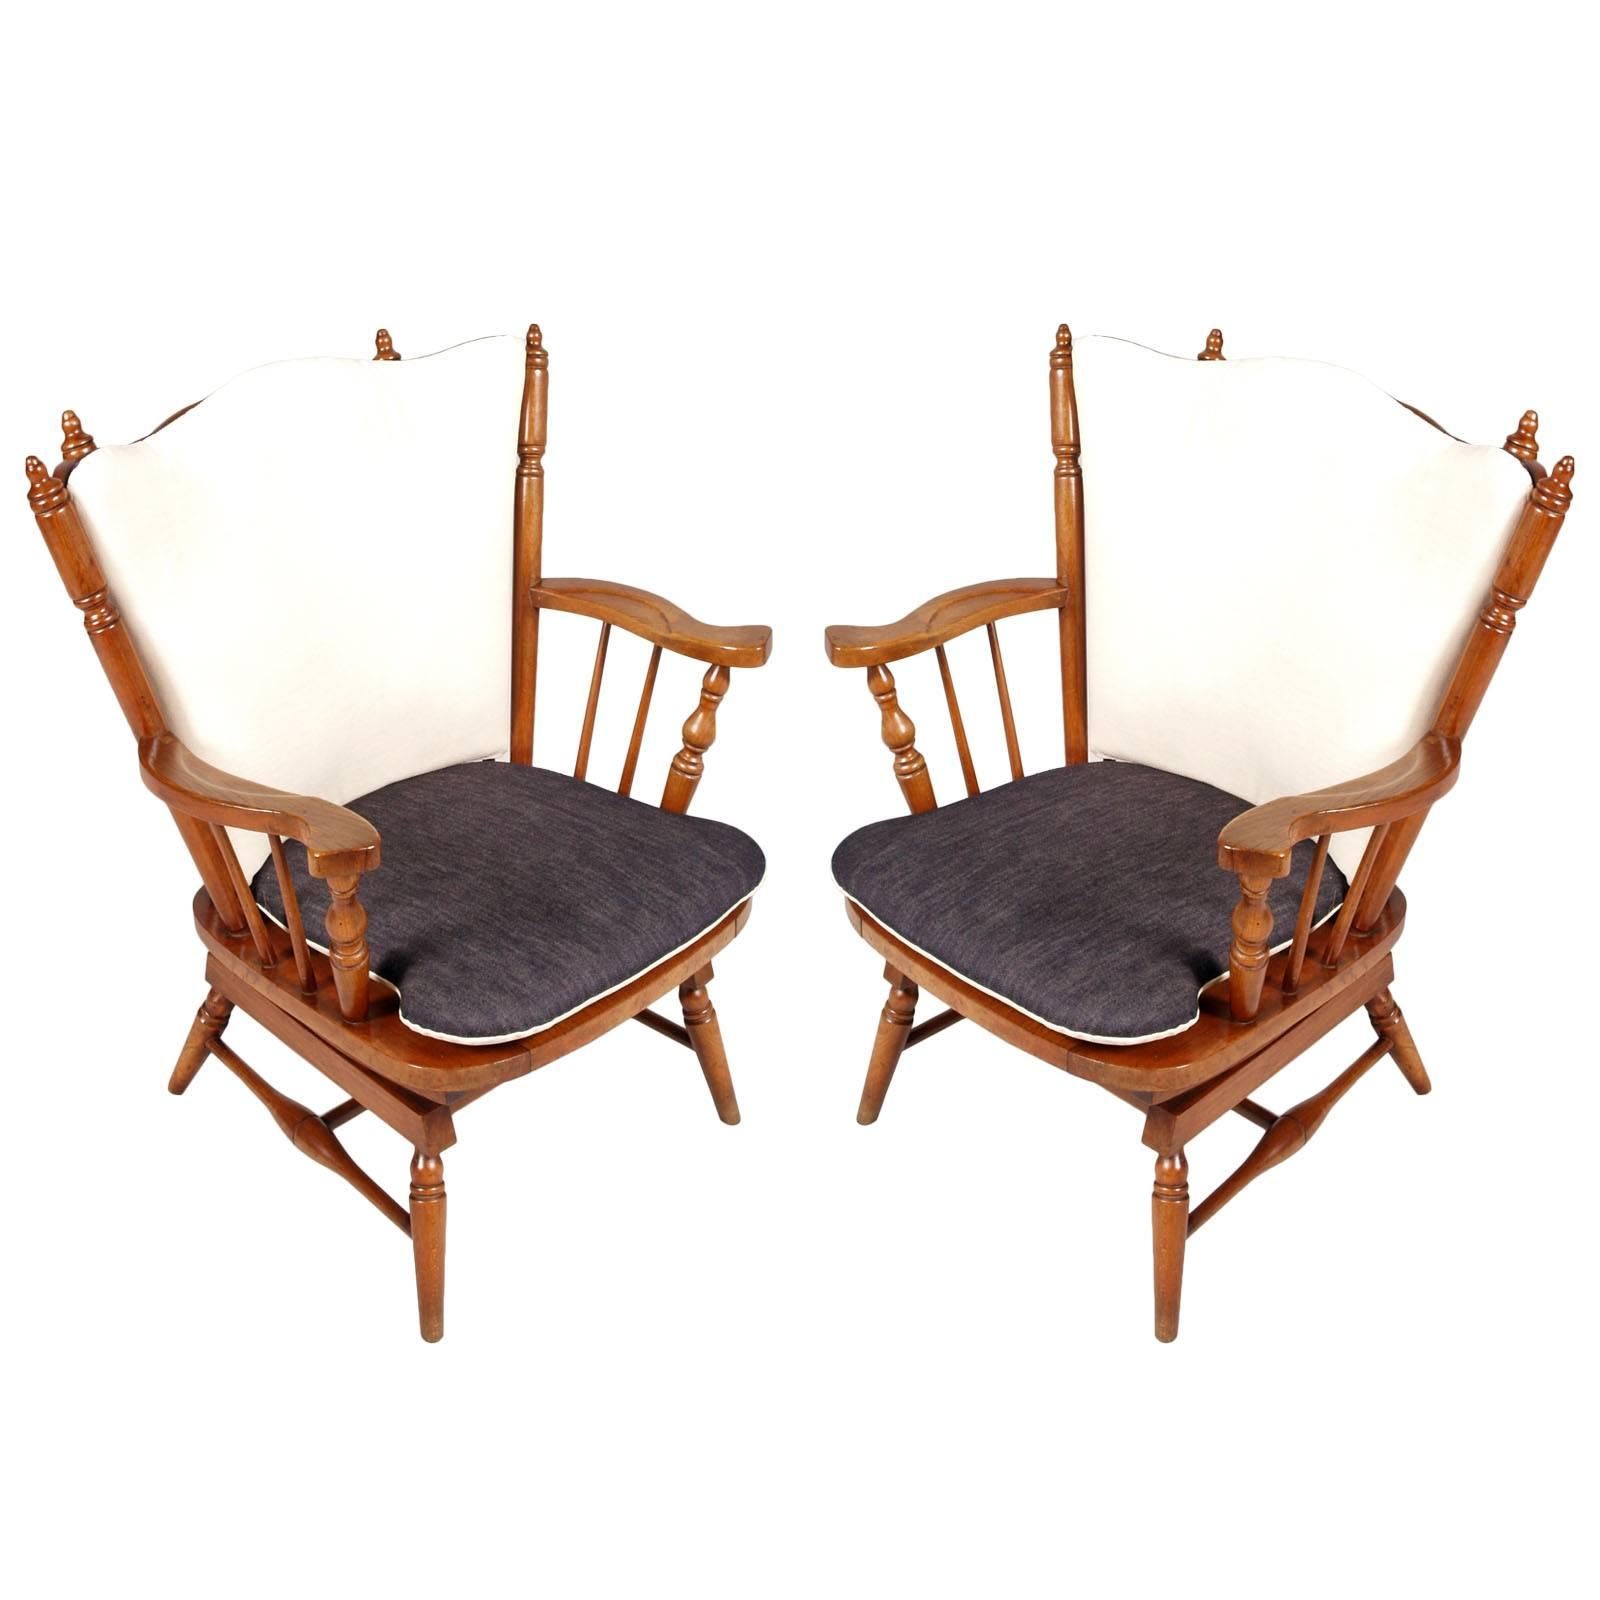 1930s Pair of Chestnut Chiavari Rocking Chairs with Springs, old America style